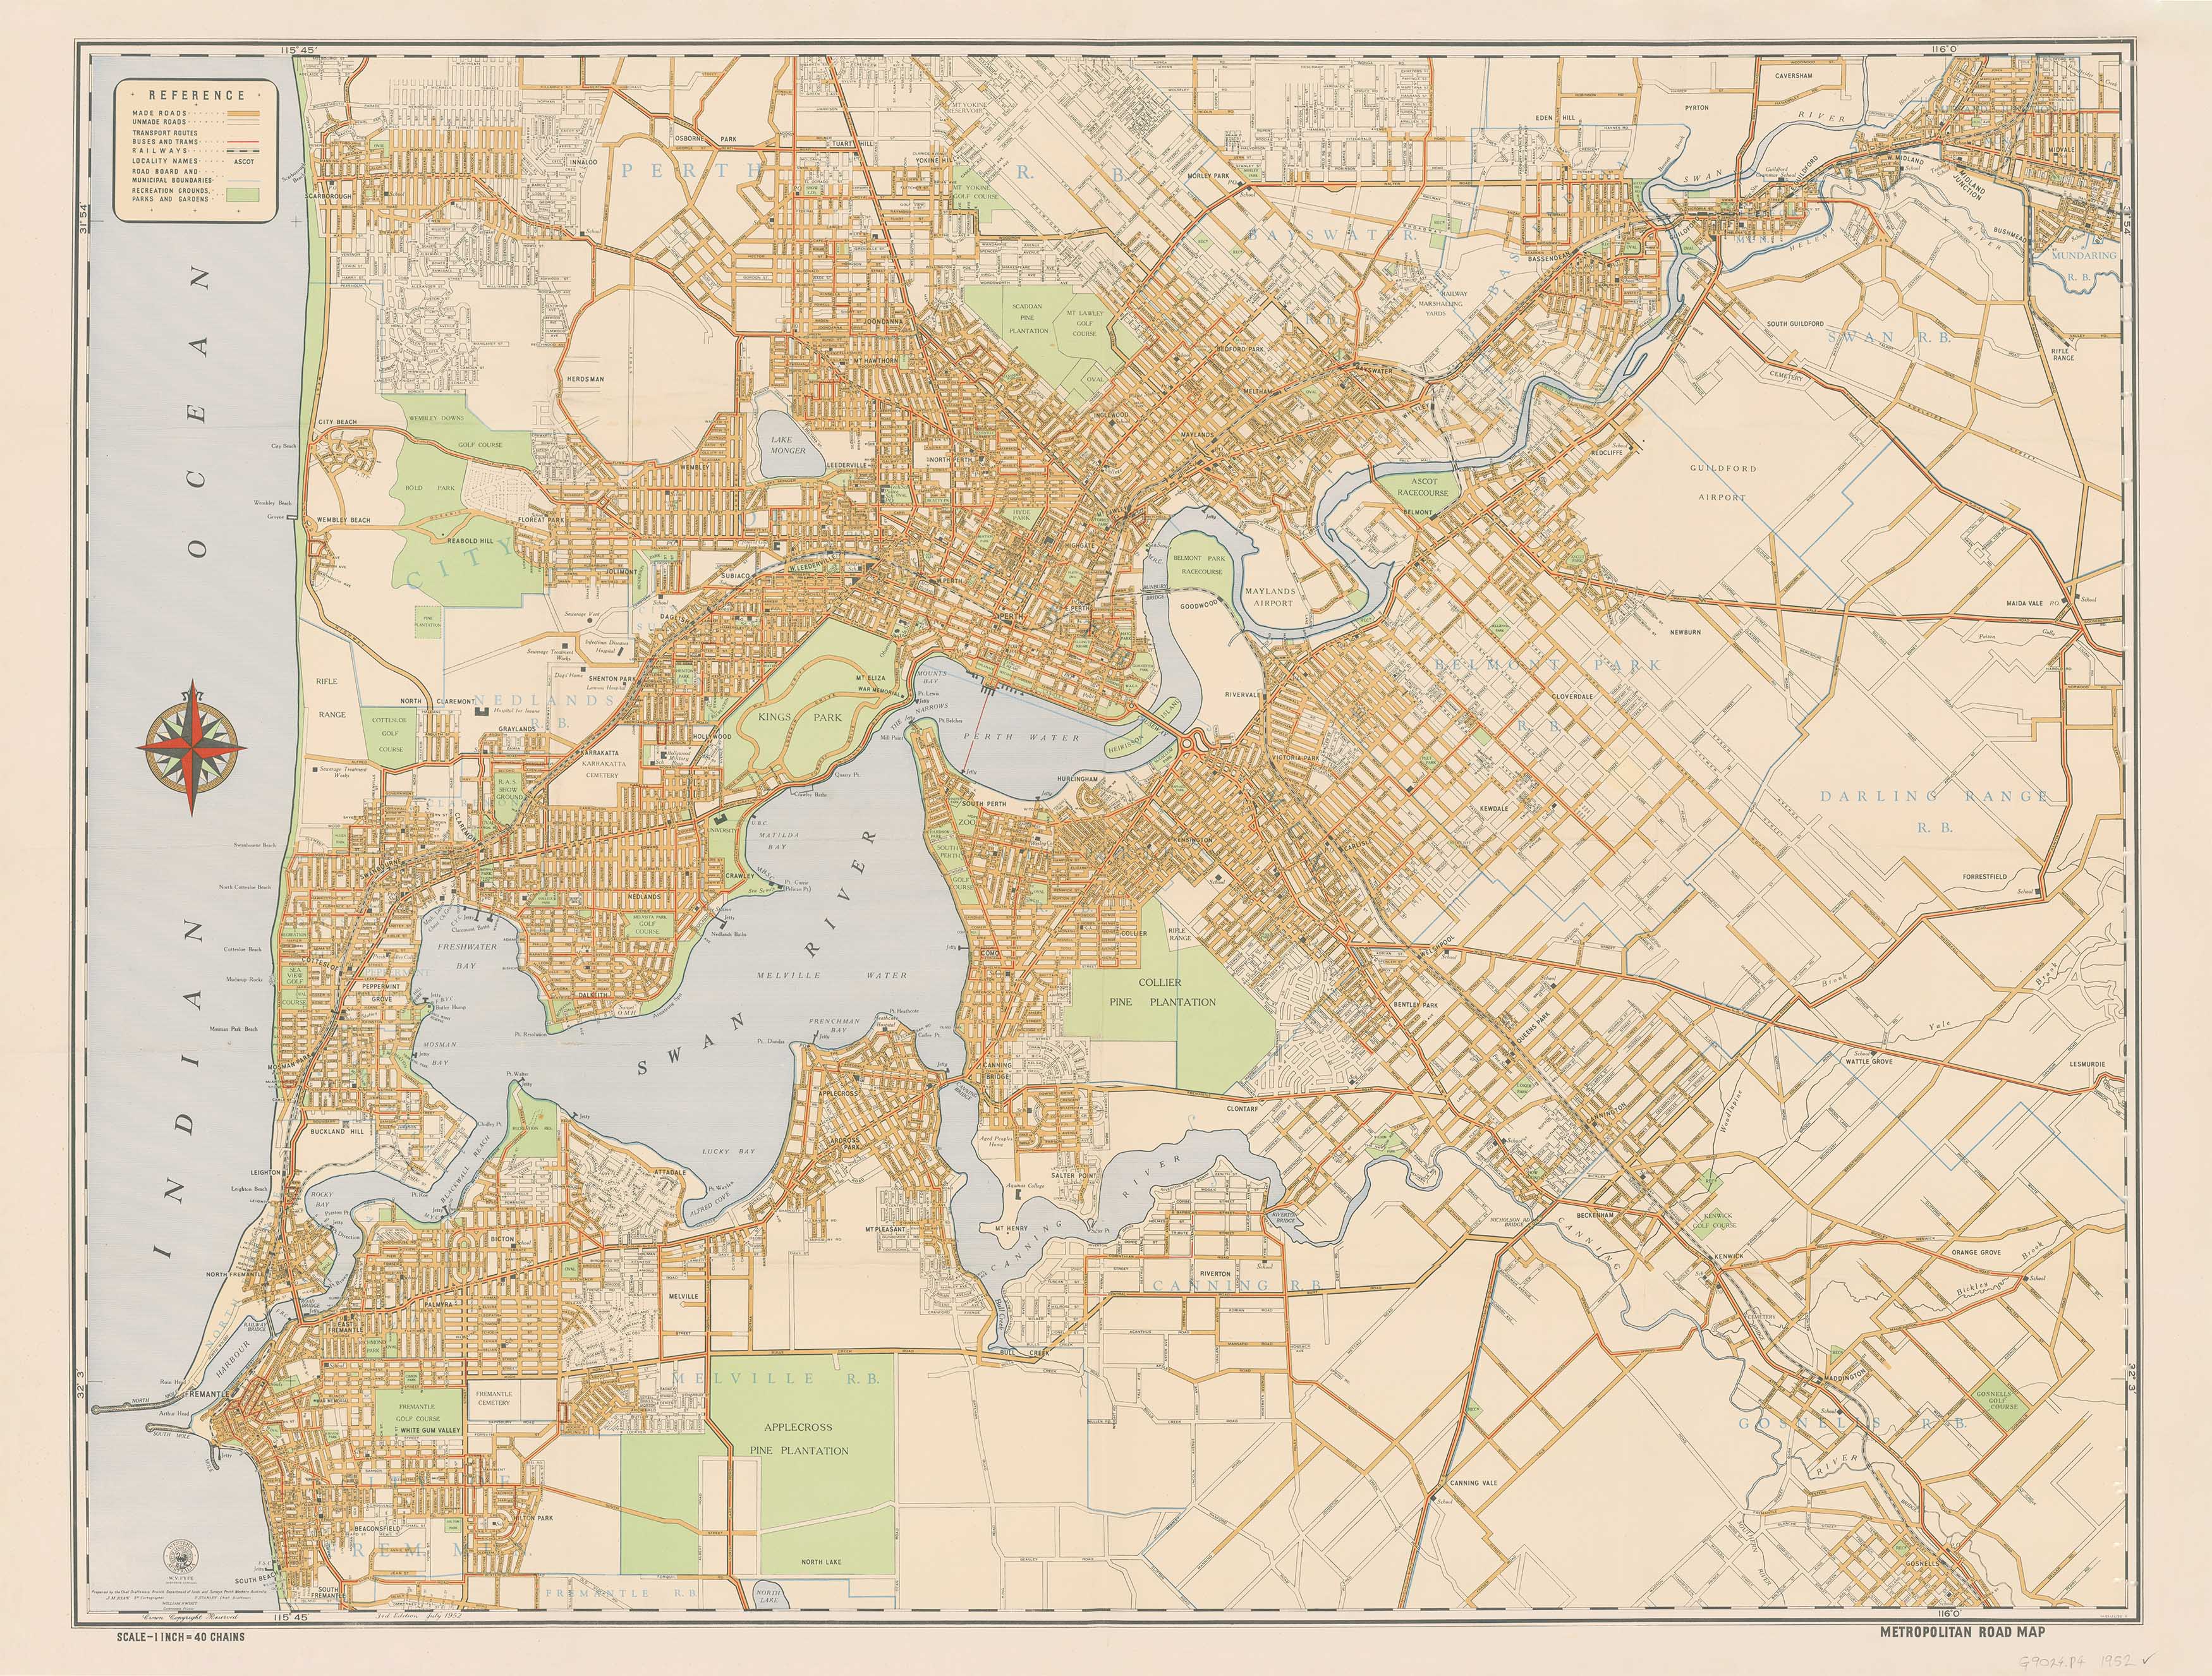 Buy Perth Tramways Wall Map Buy Historic Map Of Perth Mapworld | Images ...